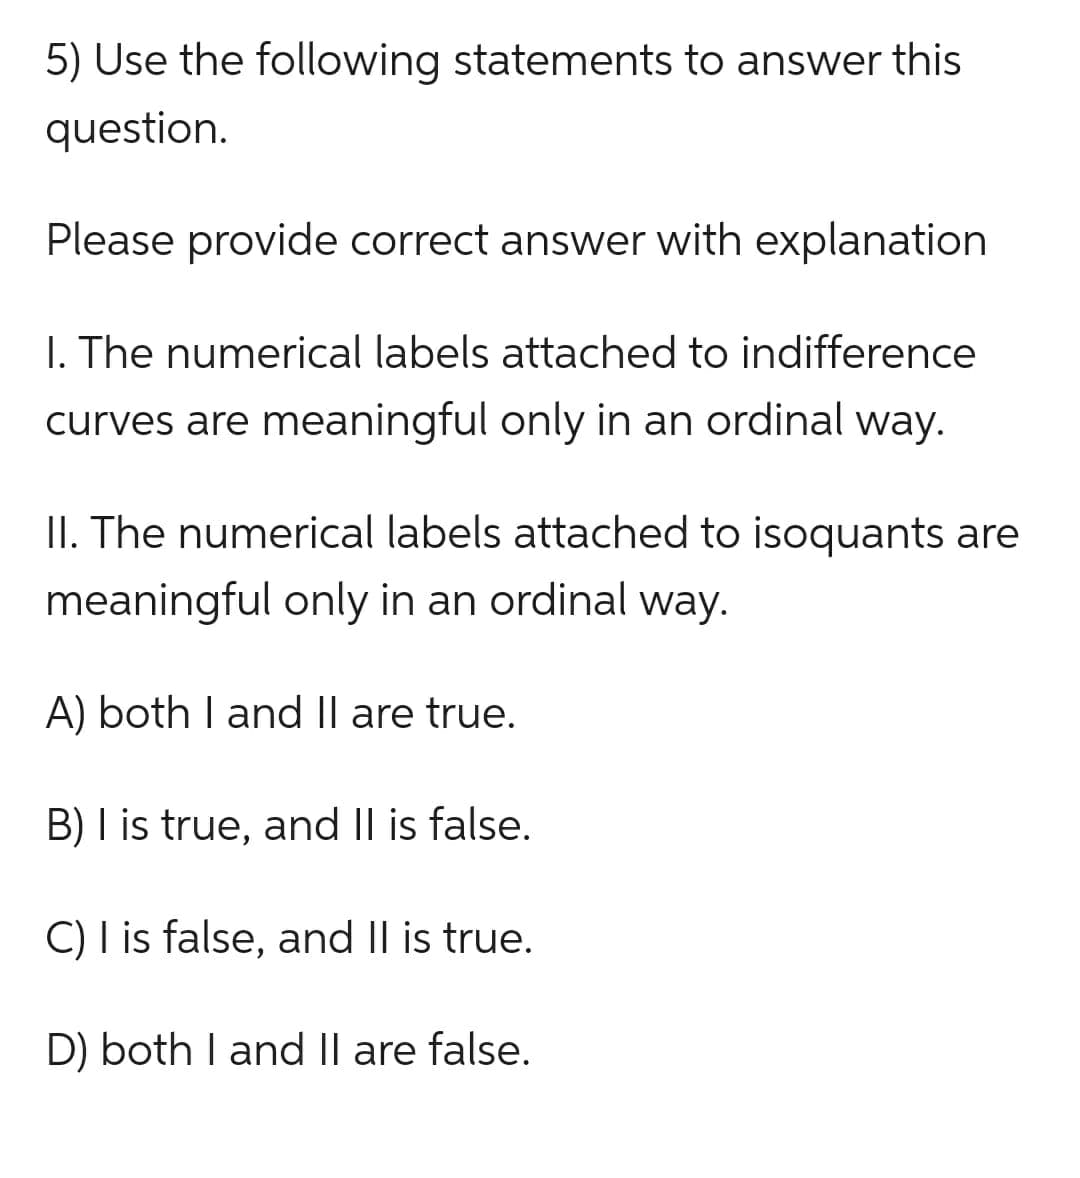 5) Use the following statements to answer this
question.
Please provide correct answer with explanation
I. The numerical labels attached to indifference
curves are meaningful only in an ordinal way.
II. The numerical labels attached to isoquants are
meaningful only in an ordinal way.
A) both I and II are true.
B) I is true, and II is false.
C) I is false, and II is true.
D) both I and II are false.